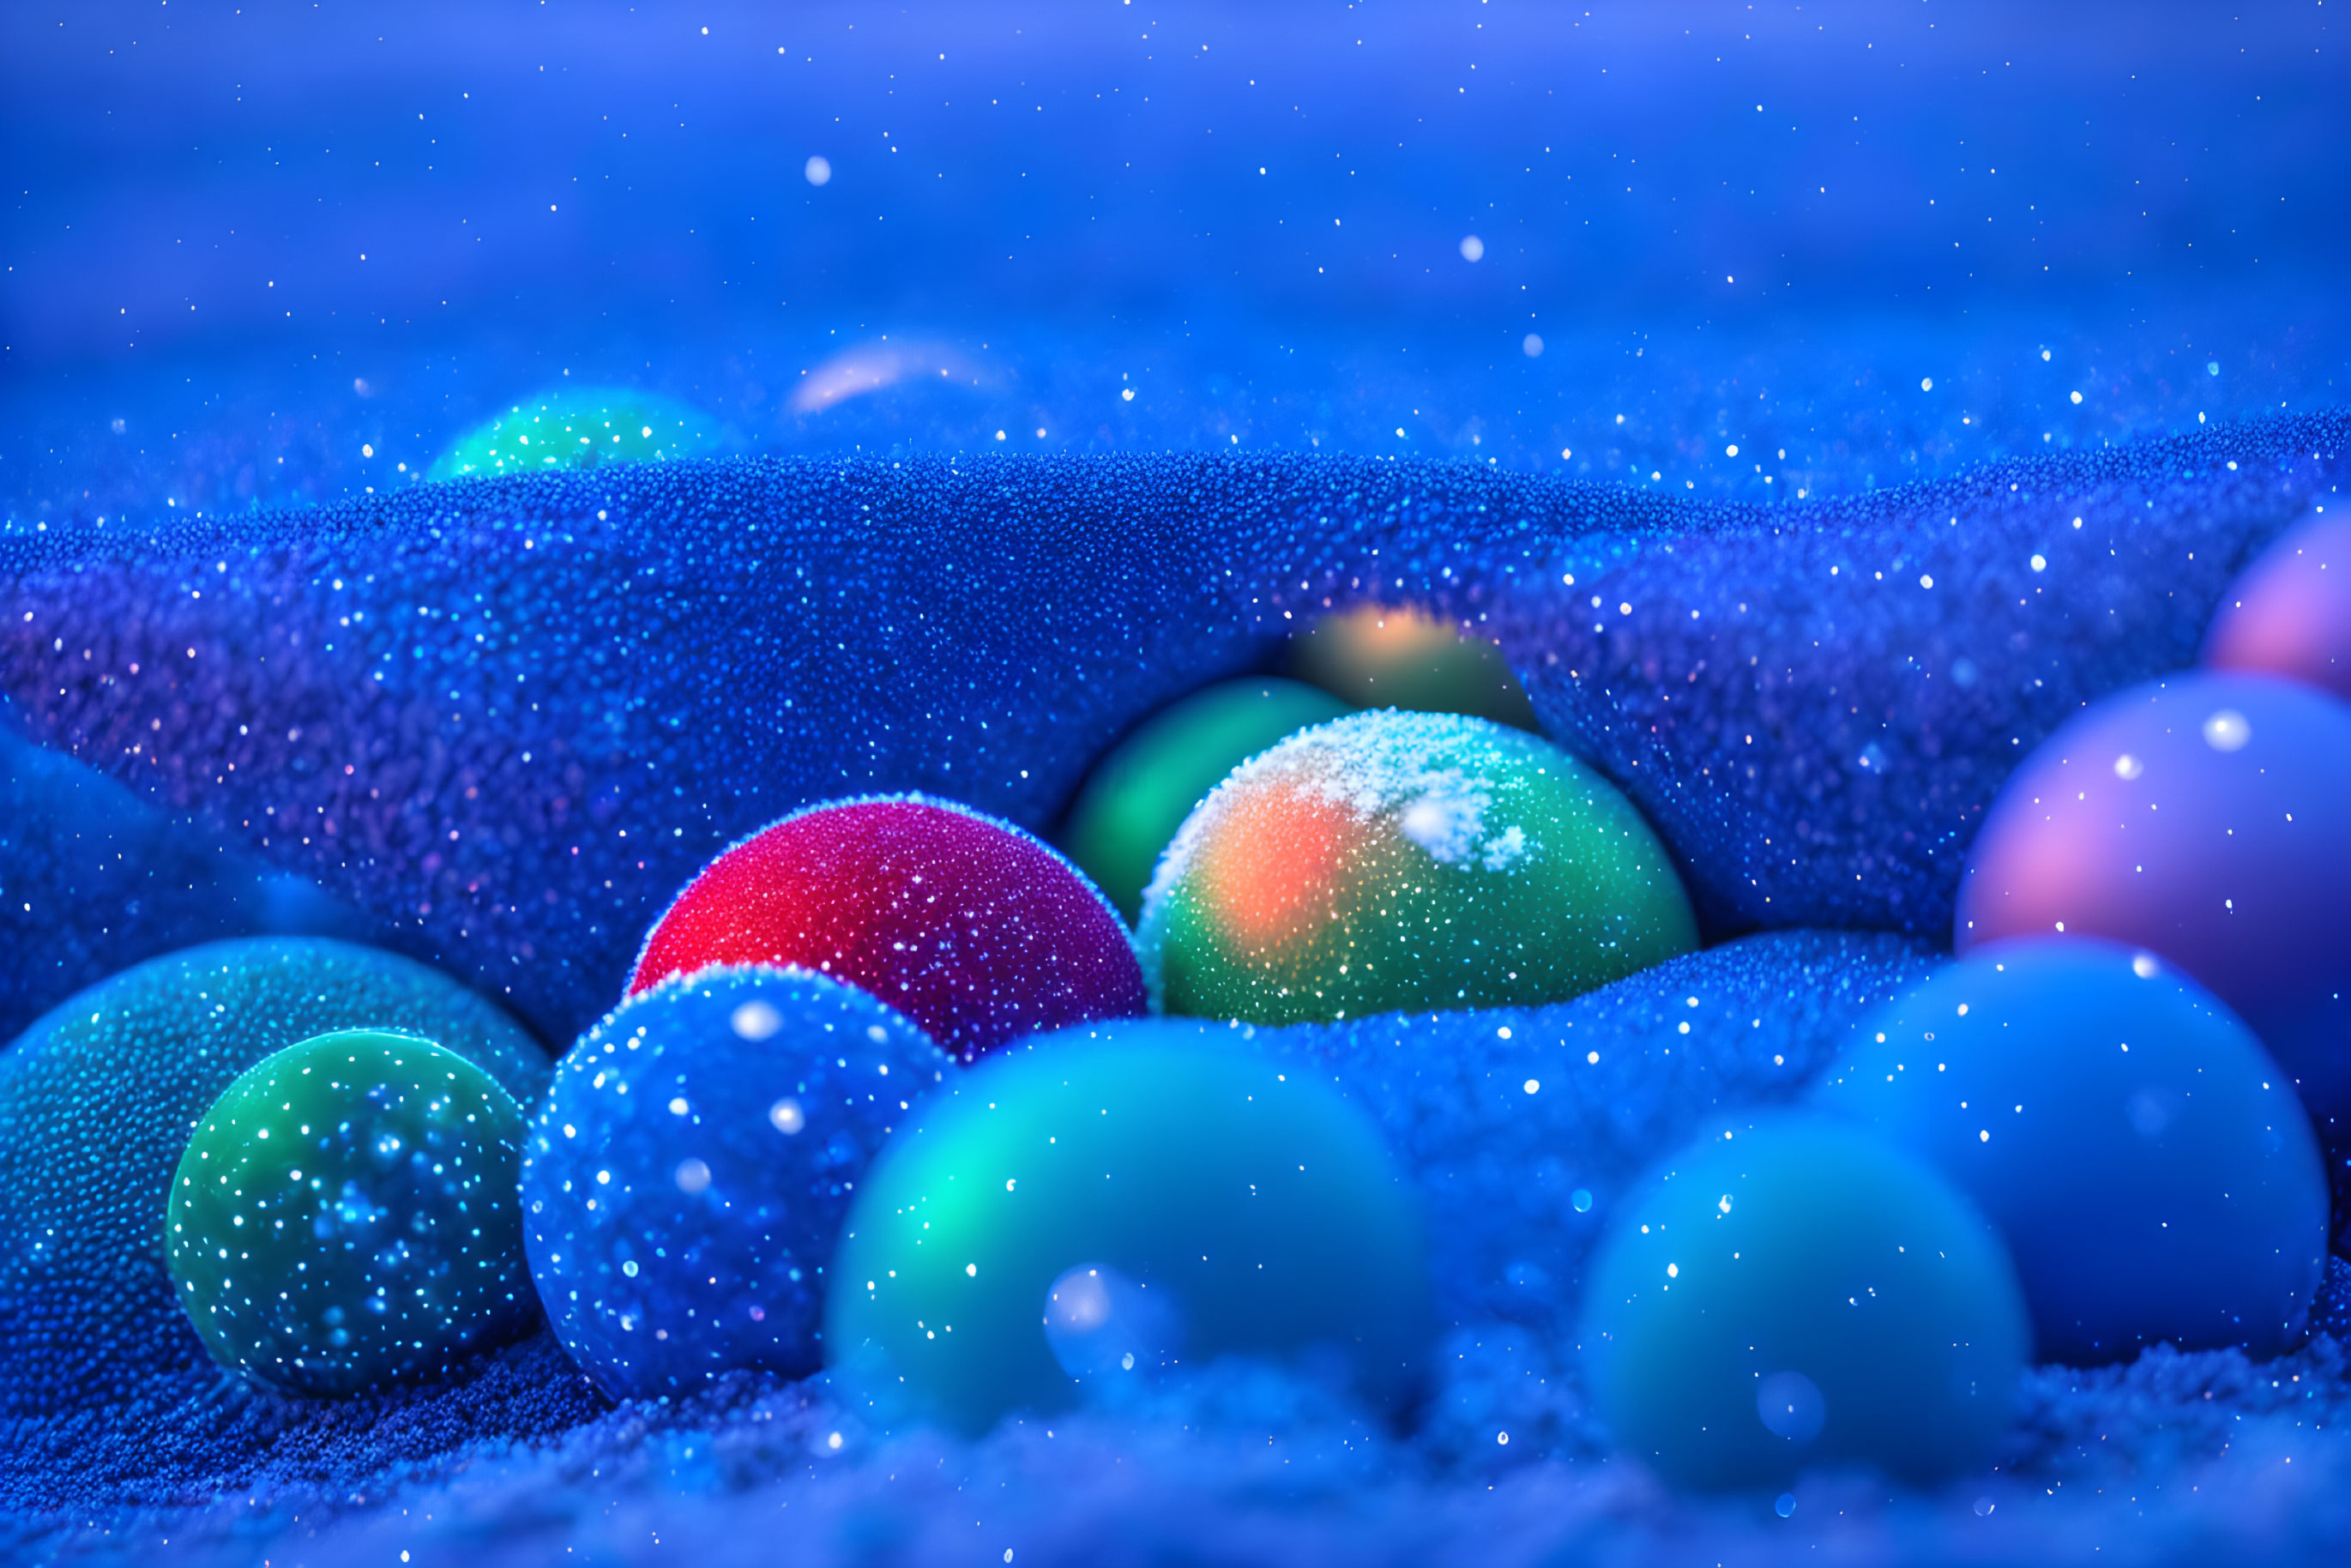 Cosmic Oasis: Colorful Spheres in Blue Sand